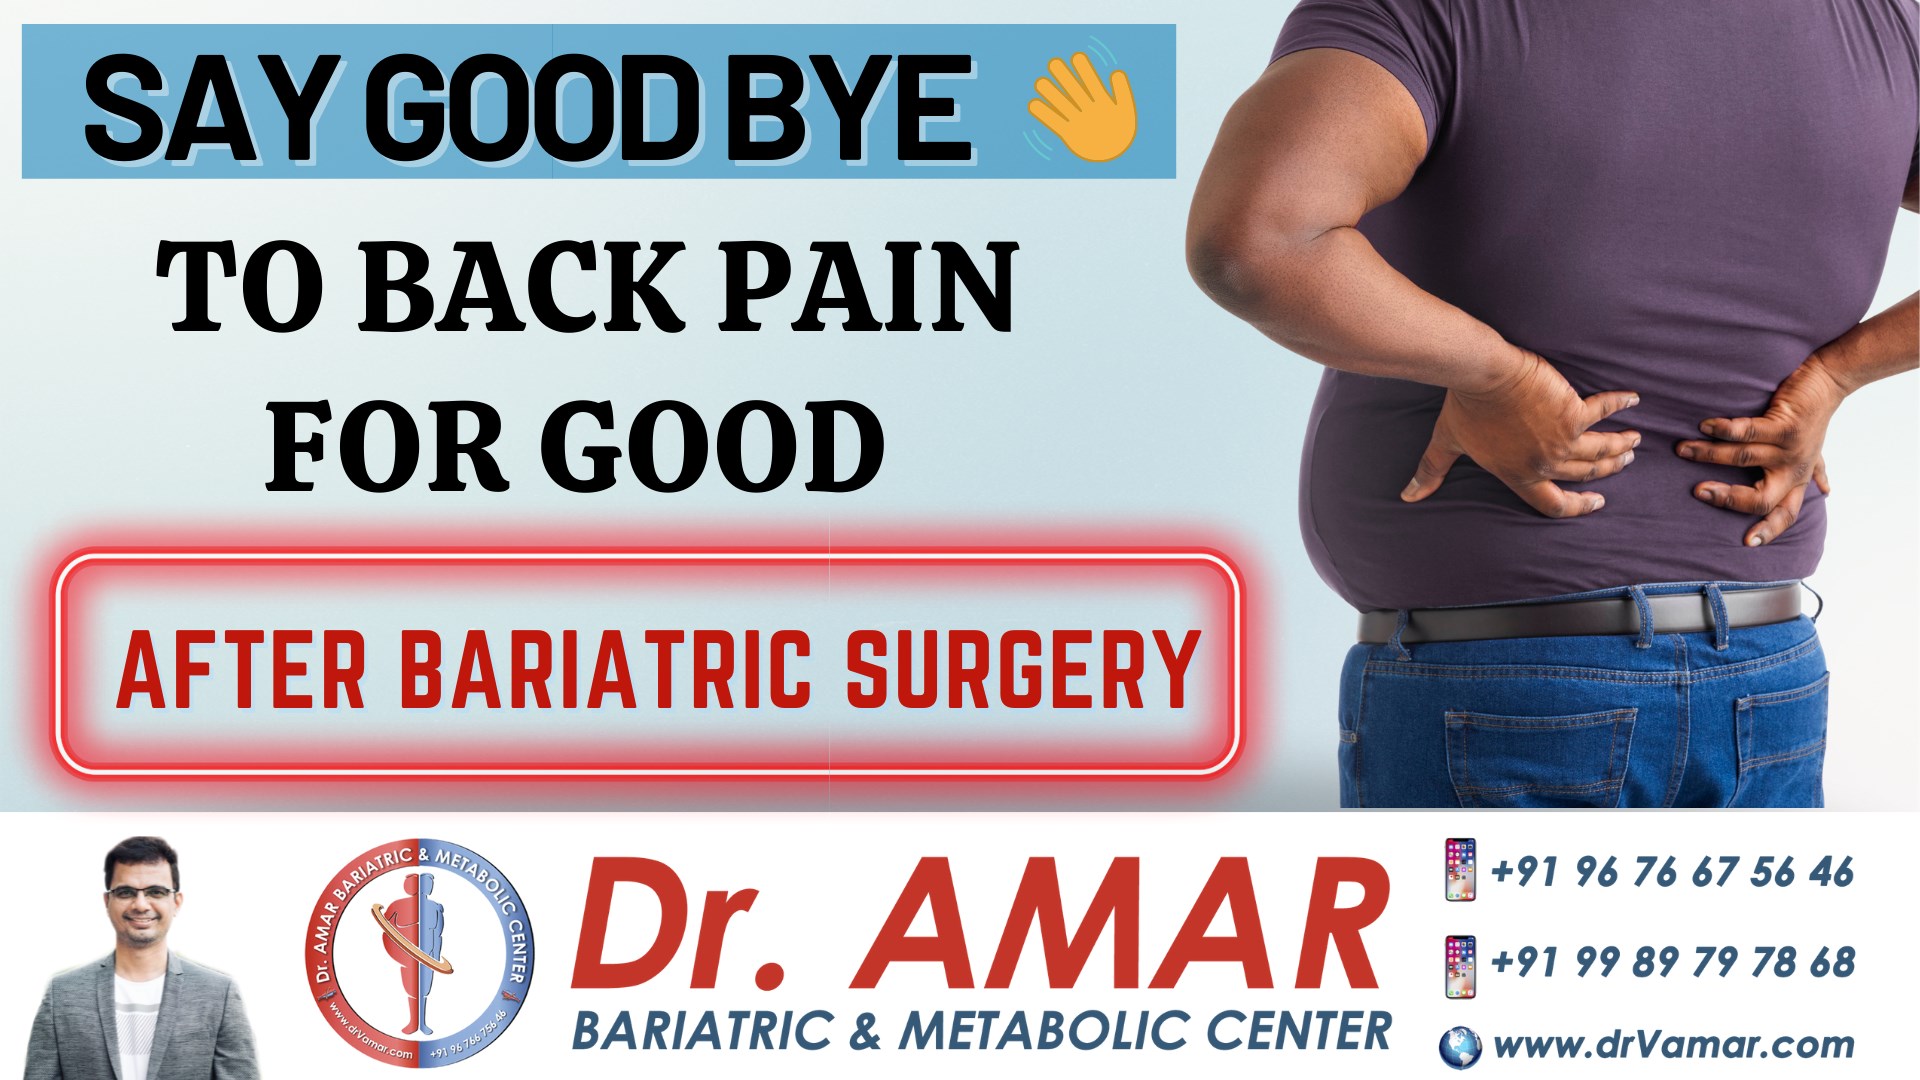 say good bye to back pain for good after bariatric surgery